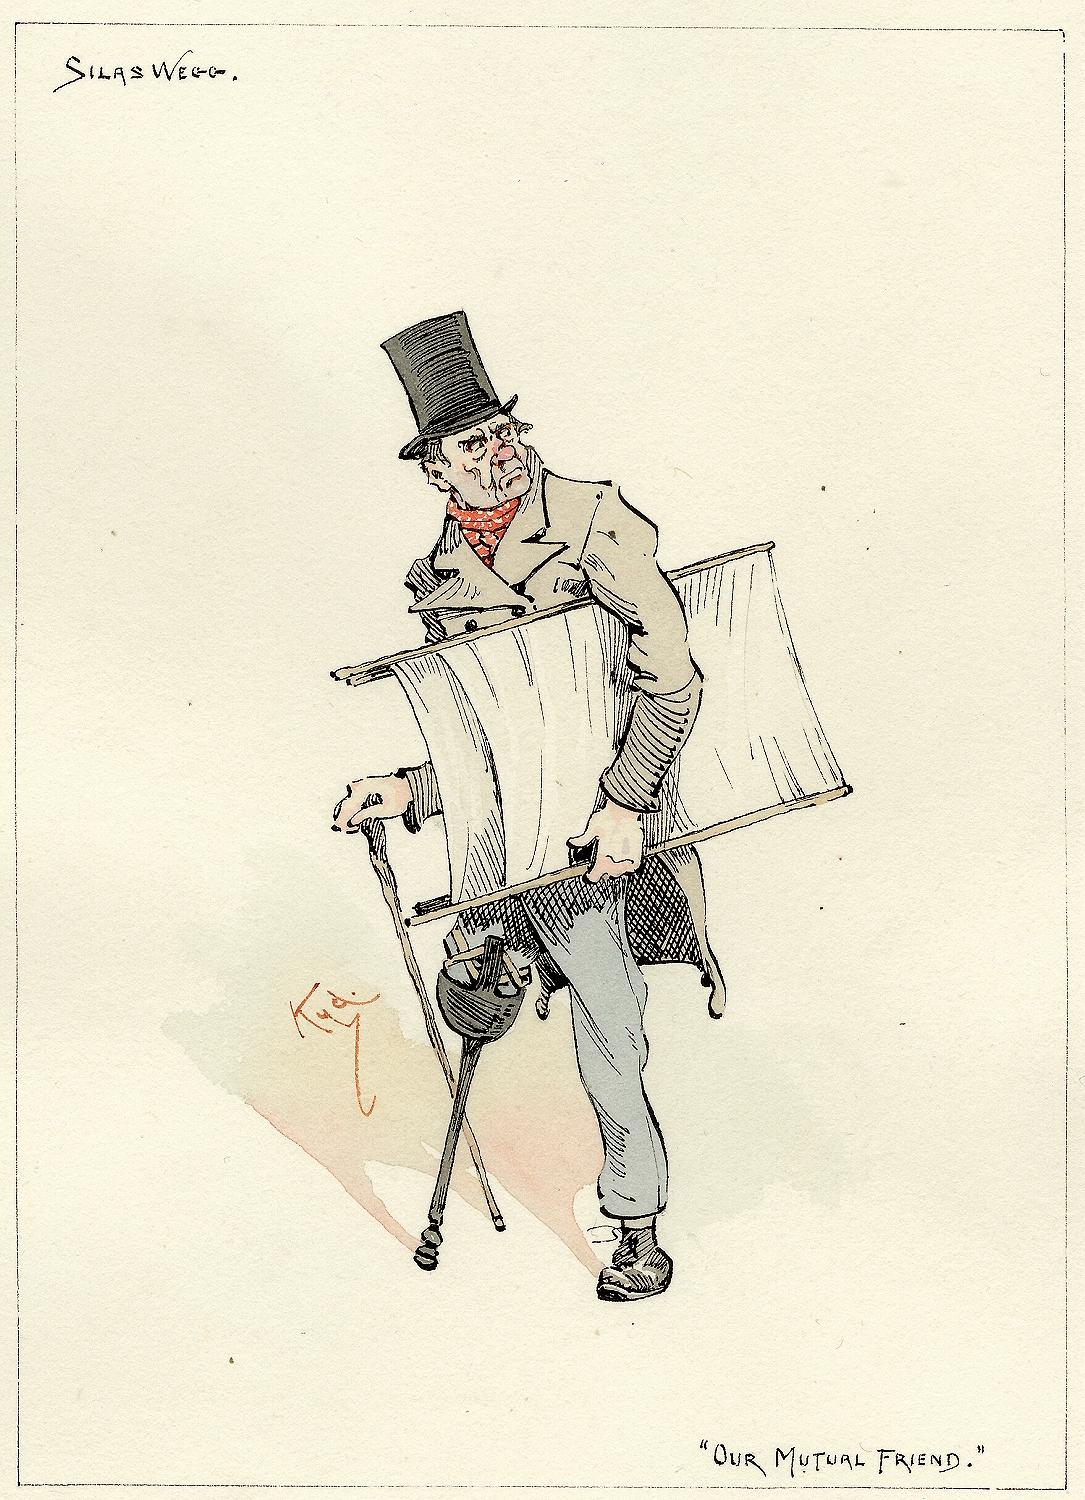 British (KYD) - DICKENS - Silas Wegg (from Our Mutual Friend) - ORIGINAL SKETCH For Sale